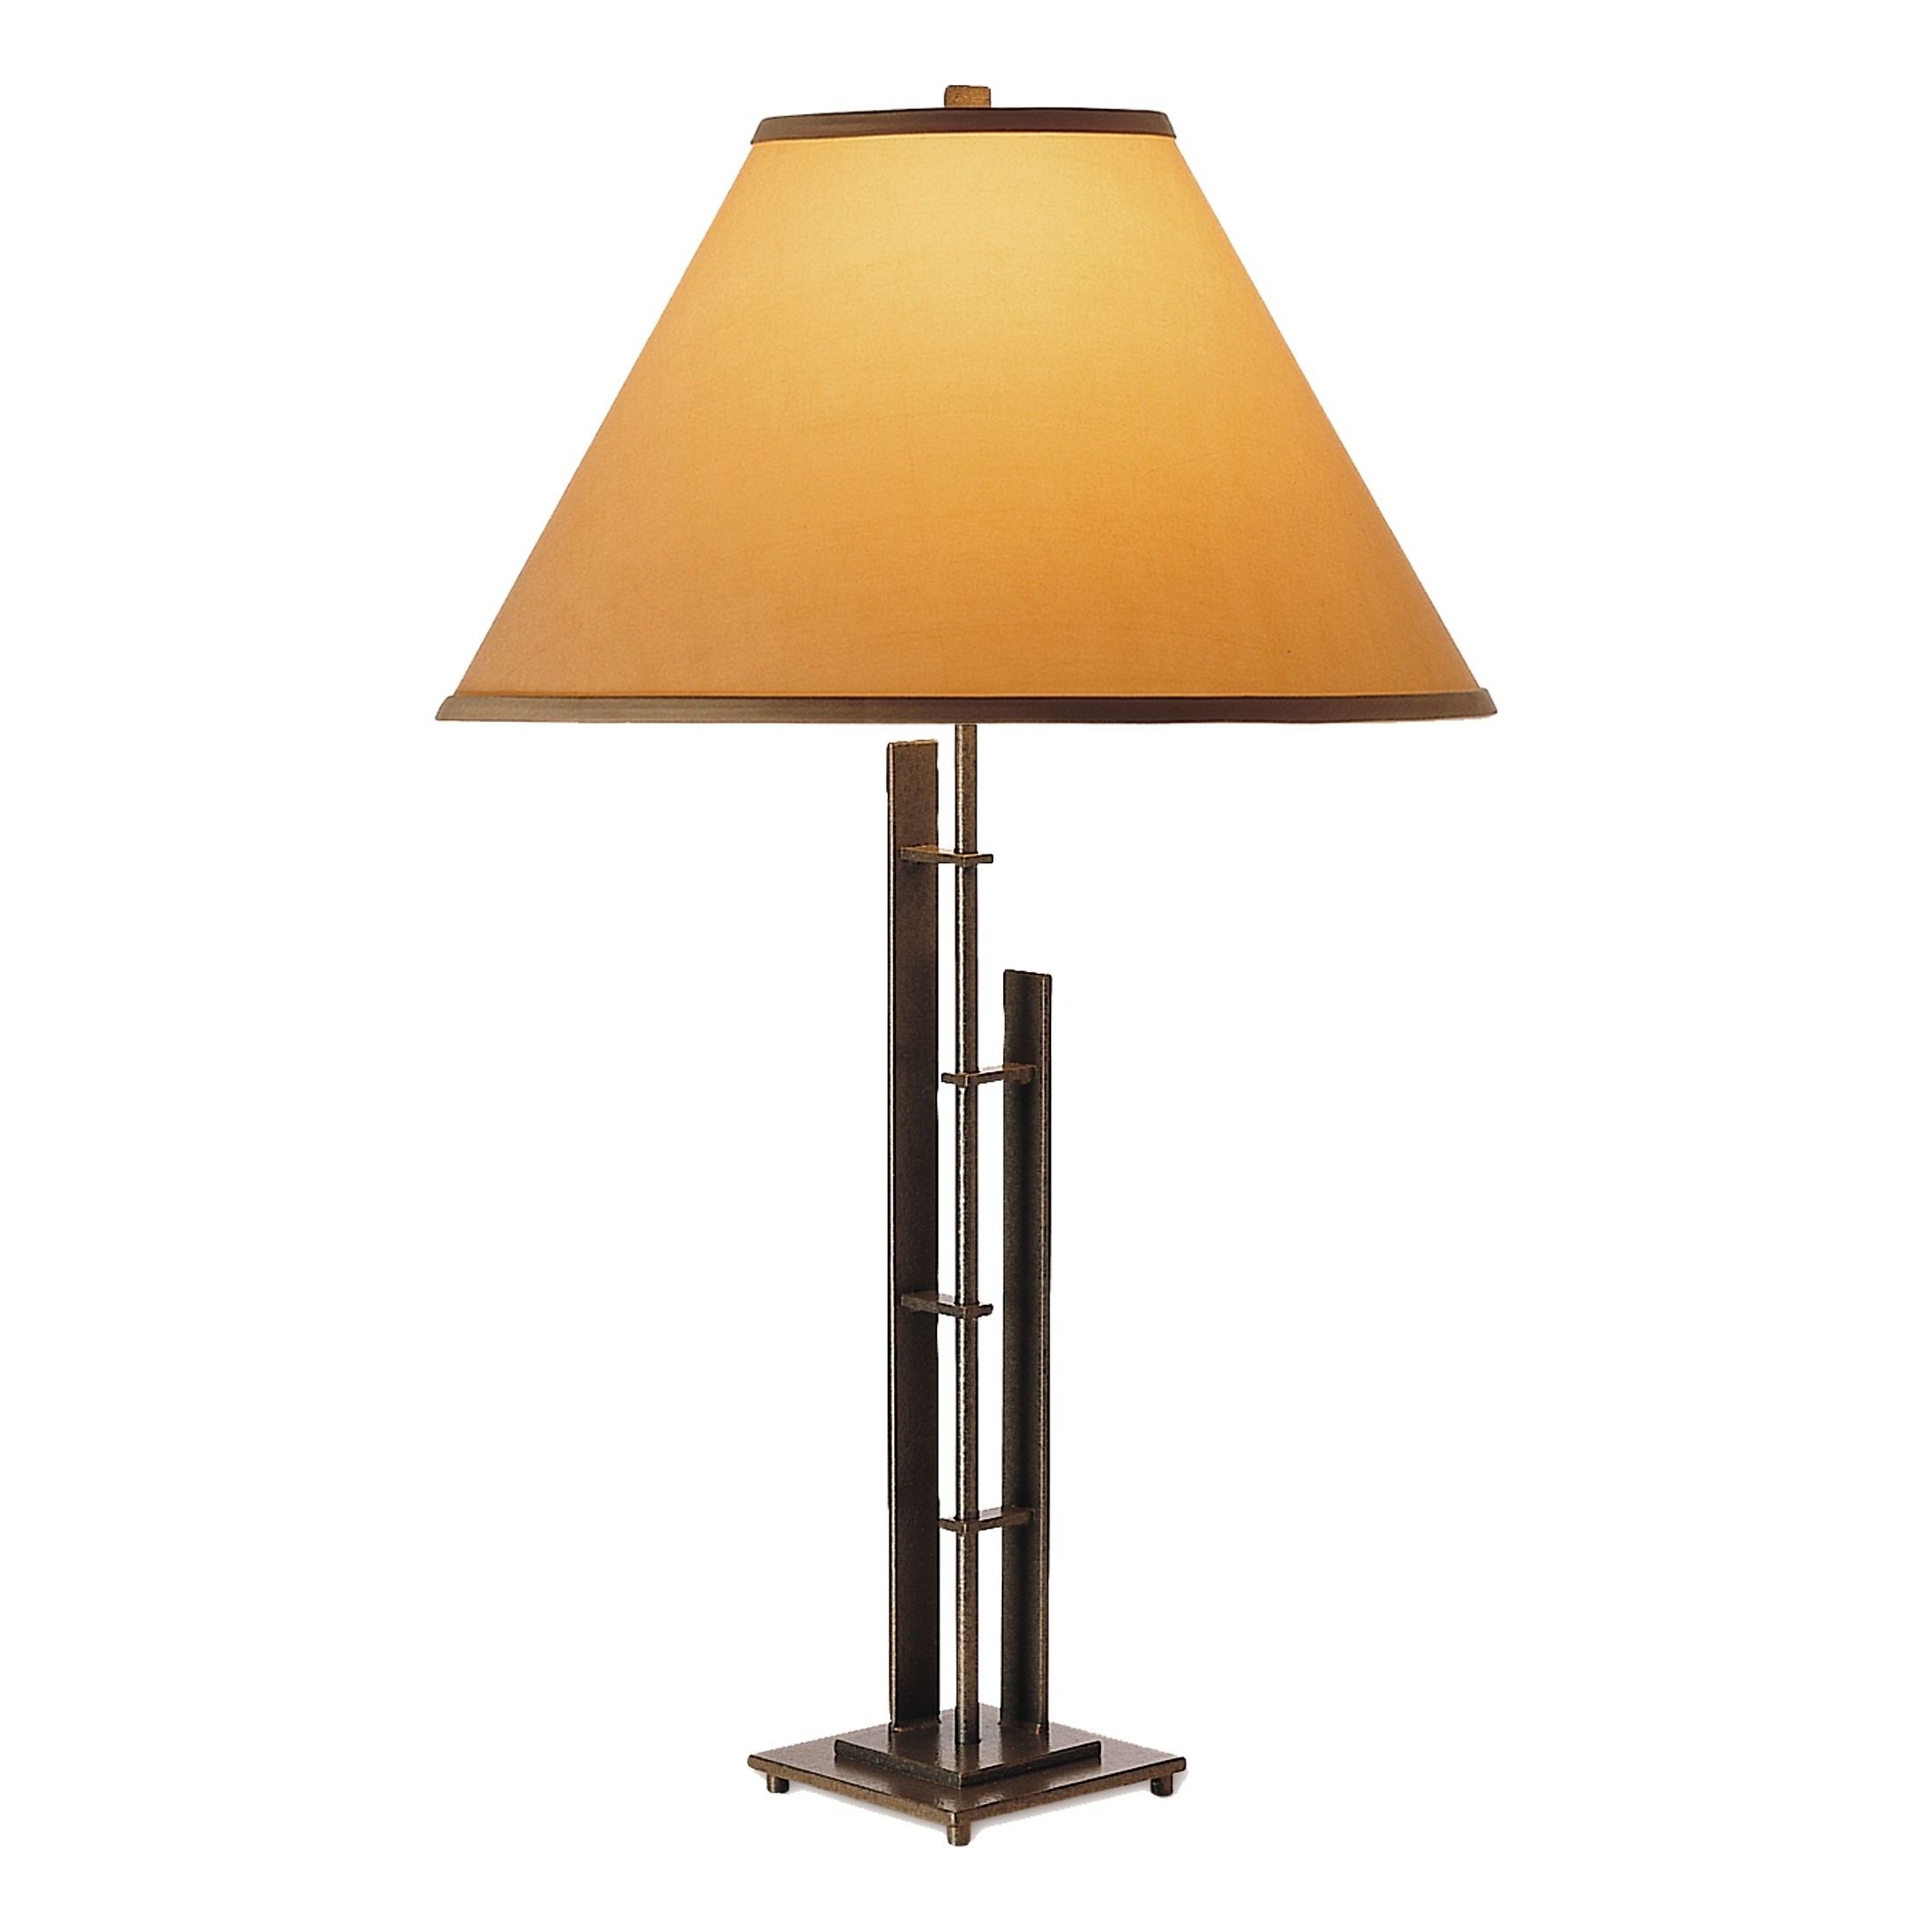 Best And Newest Lamp : Samples Image Iron Table Lamps Images Inspirations Black With Wrought Iron Living Room Table Lamps (View 1 of 20)